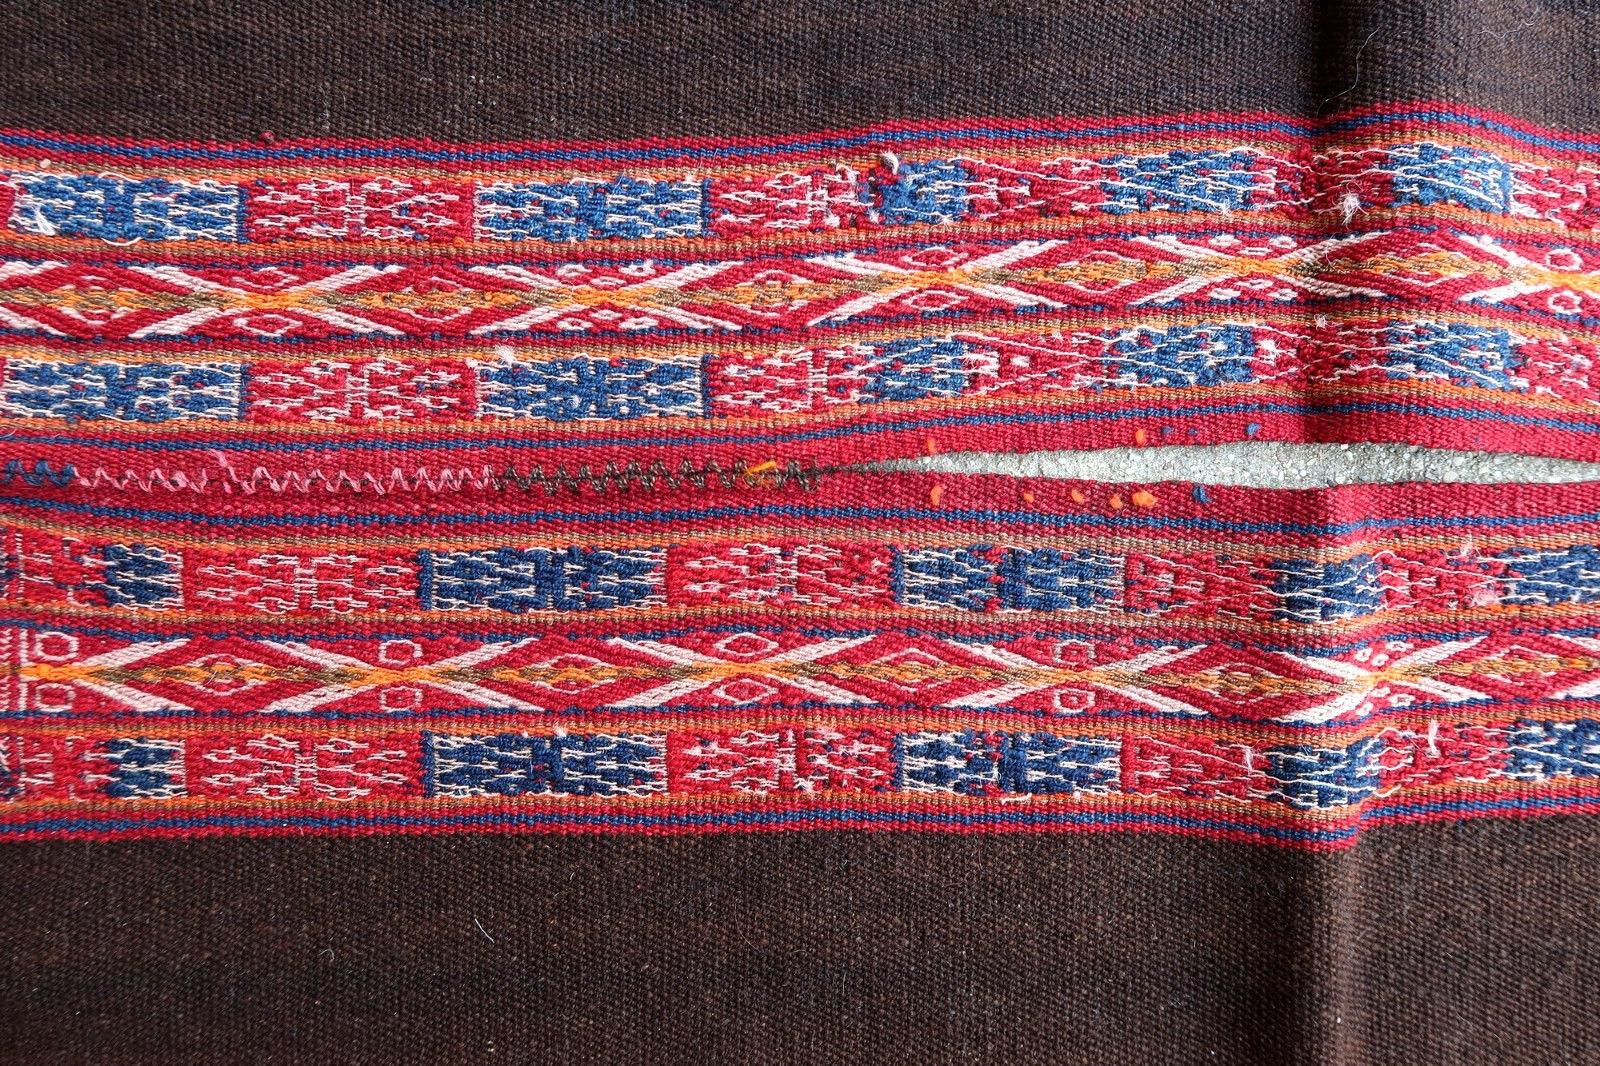 Antique poncho from Peru made from Kilim. It is from the beginning of 20th century in original good condition.

- Condition: Original good,

- circa 1900s,

- Size: 2.9' x 3.3' (90cm x 101cm),

- Material: Wool,

- Country of origin: